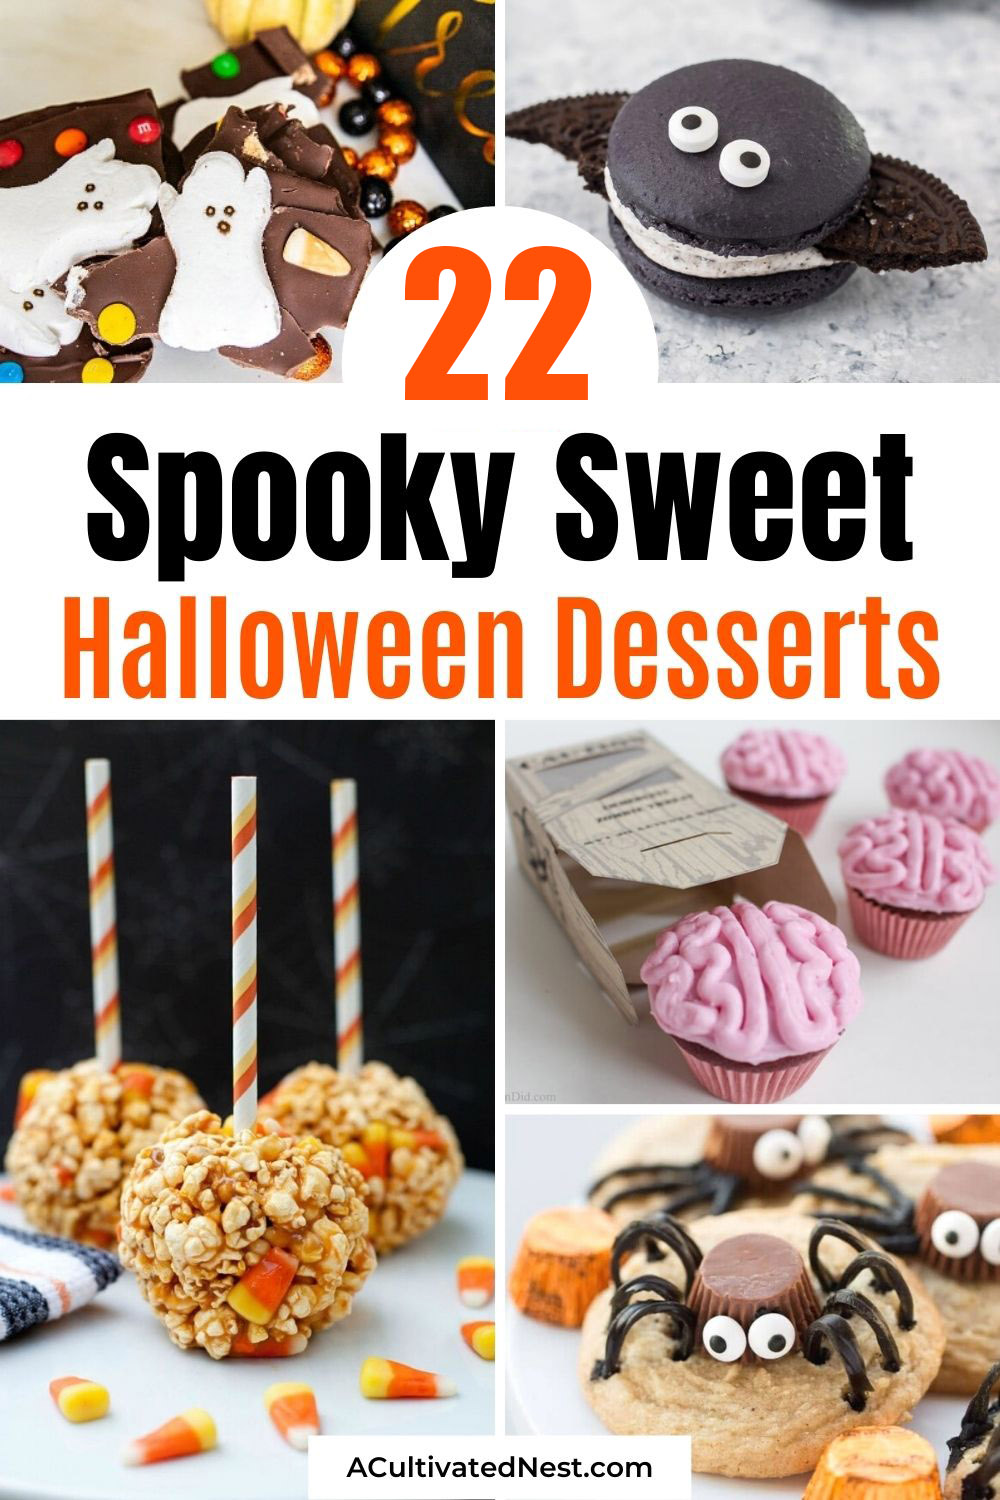 22 Spooky Sweet Halloween Desserts- These delicious homemade Halloween desserts are a fun way to celebrate Halloween! | #dessertRecipes #HalloweenDesserts #HalloweenFood #cupcakes #ACultivatedNest